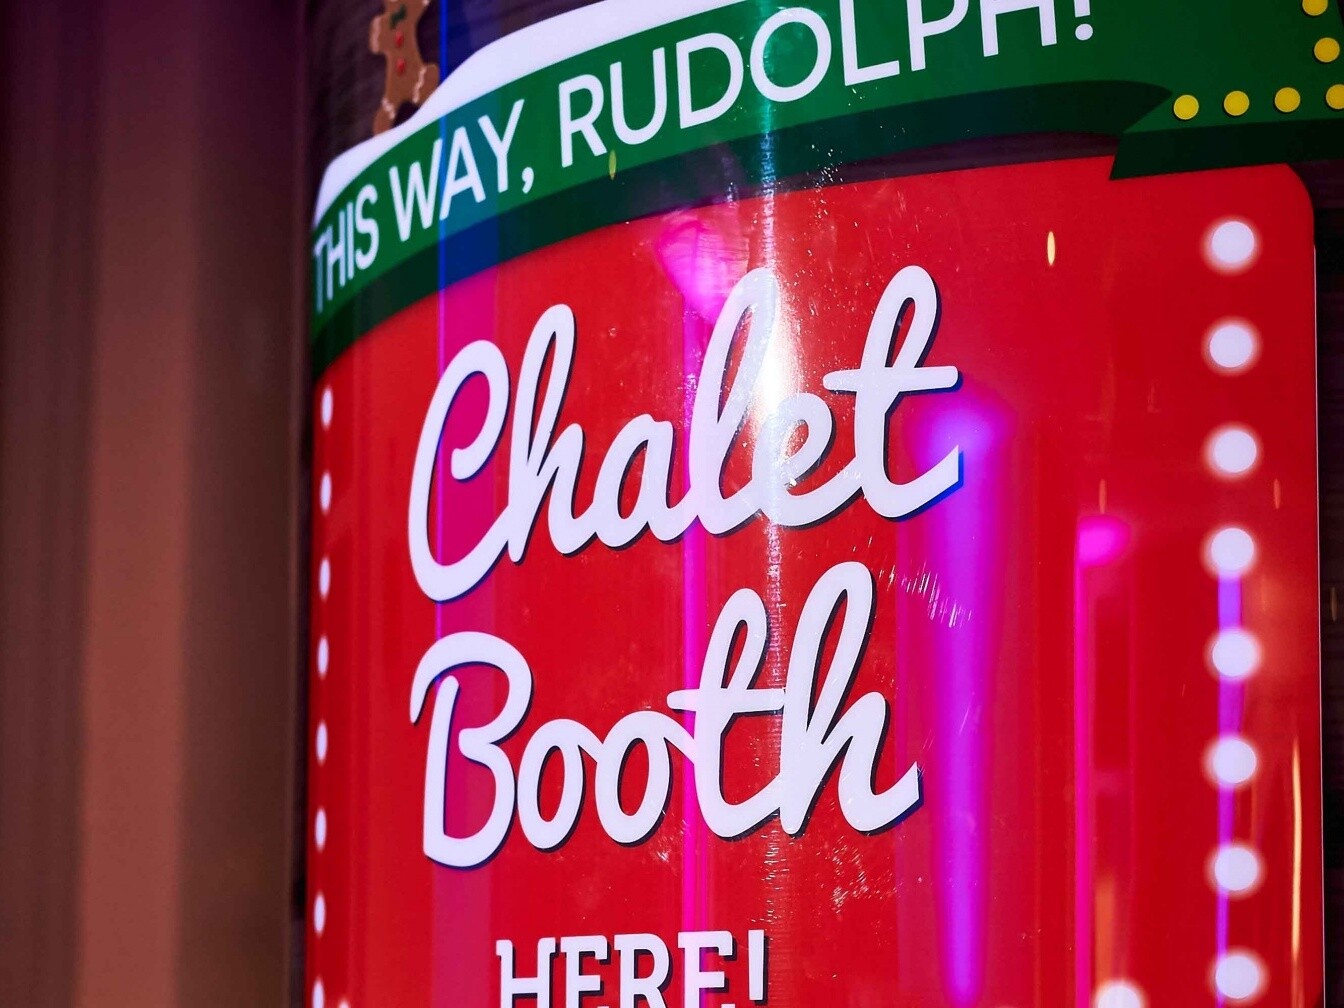 Chalet Booth